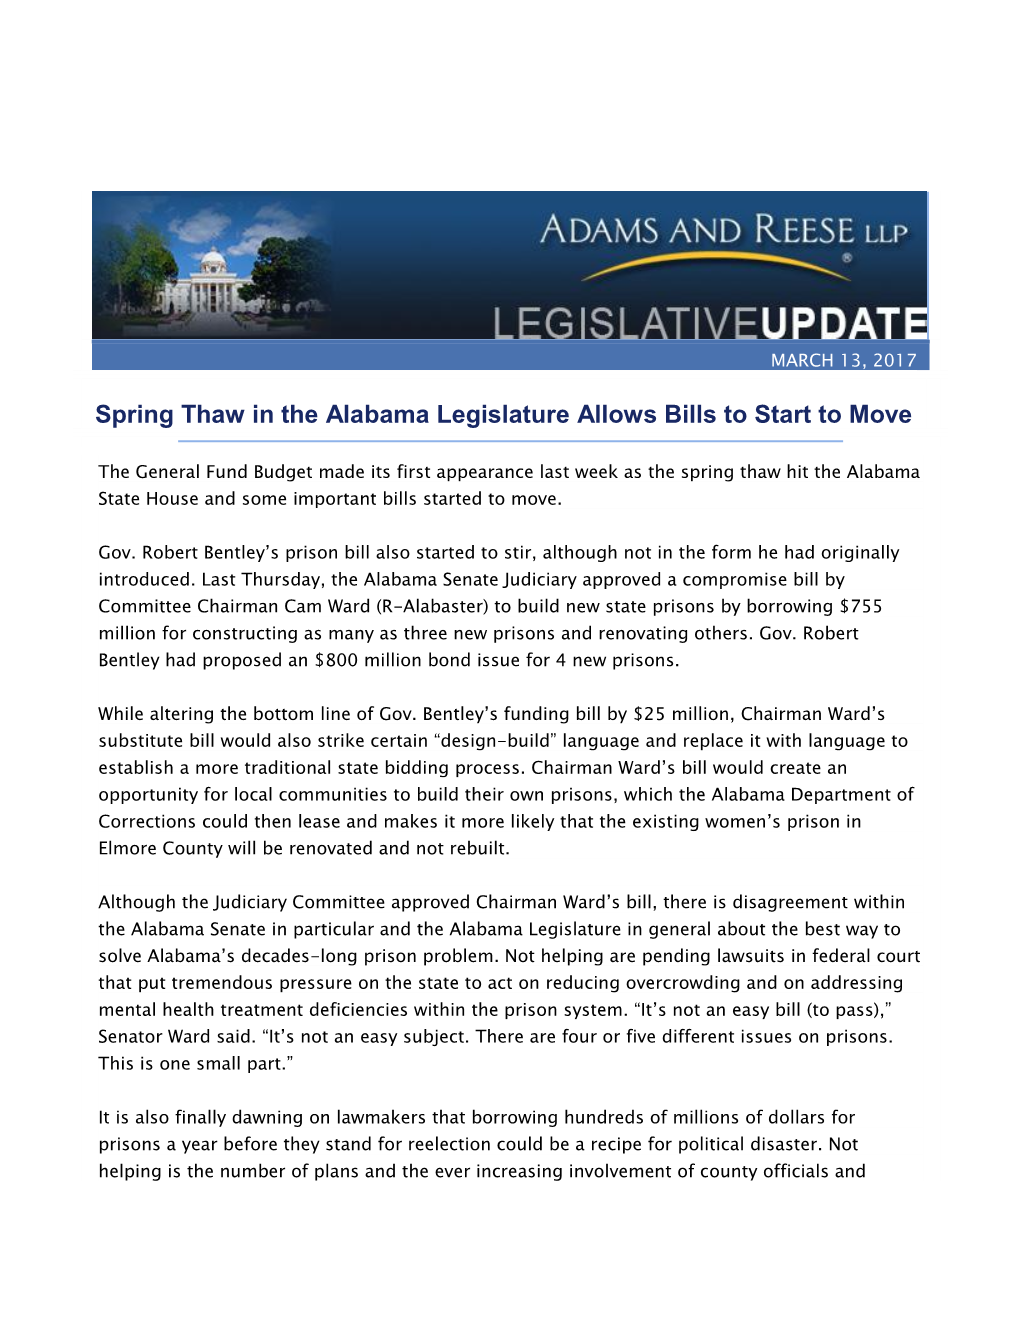 Spring Thaw in the Alabama Legislature Allows Bills to Start to Move